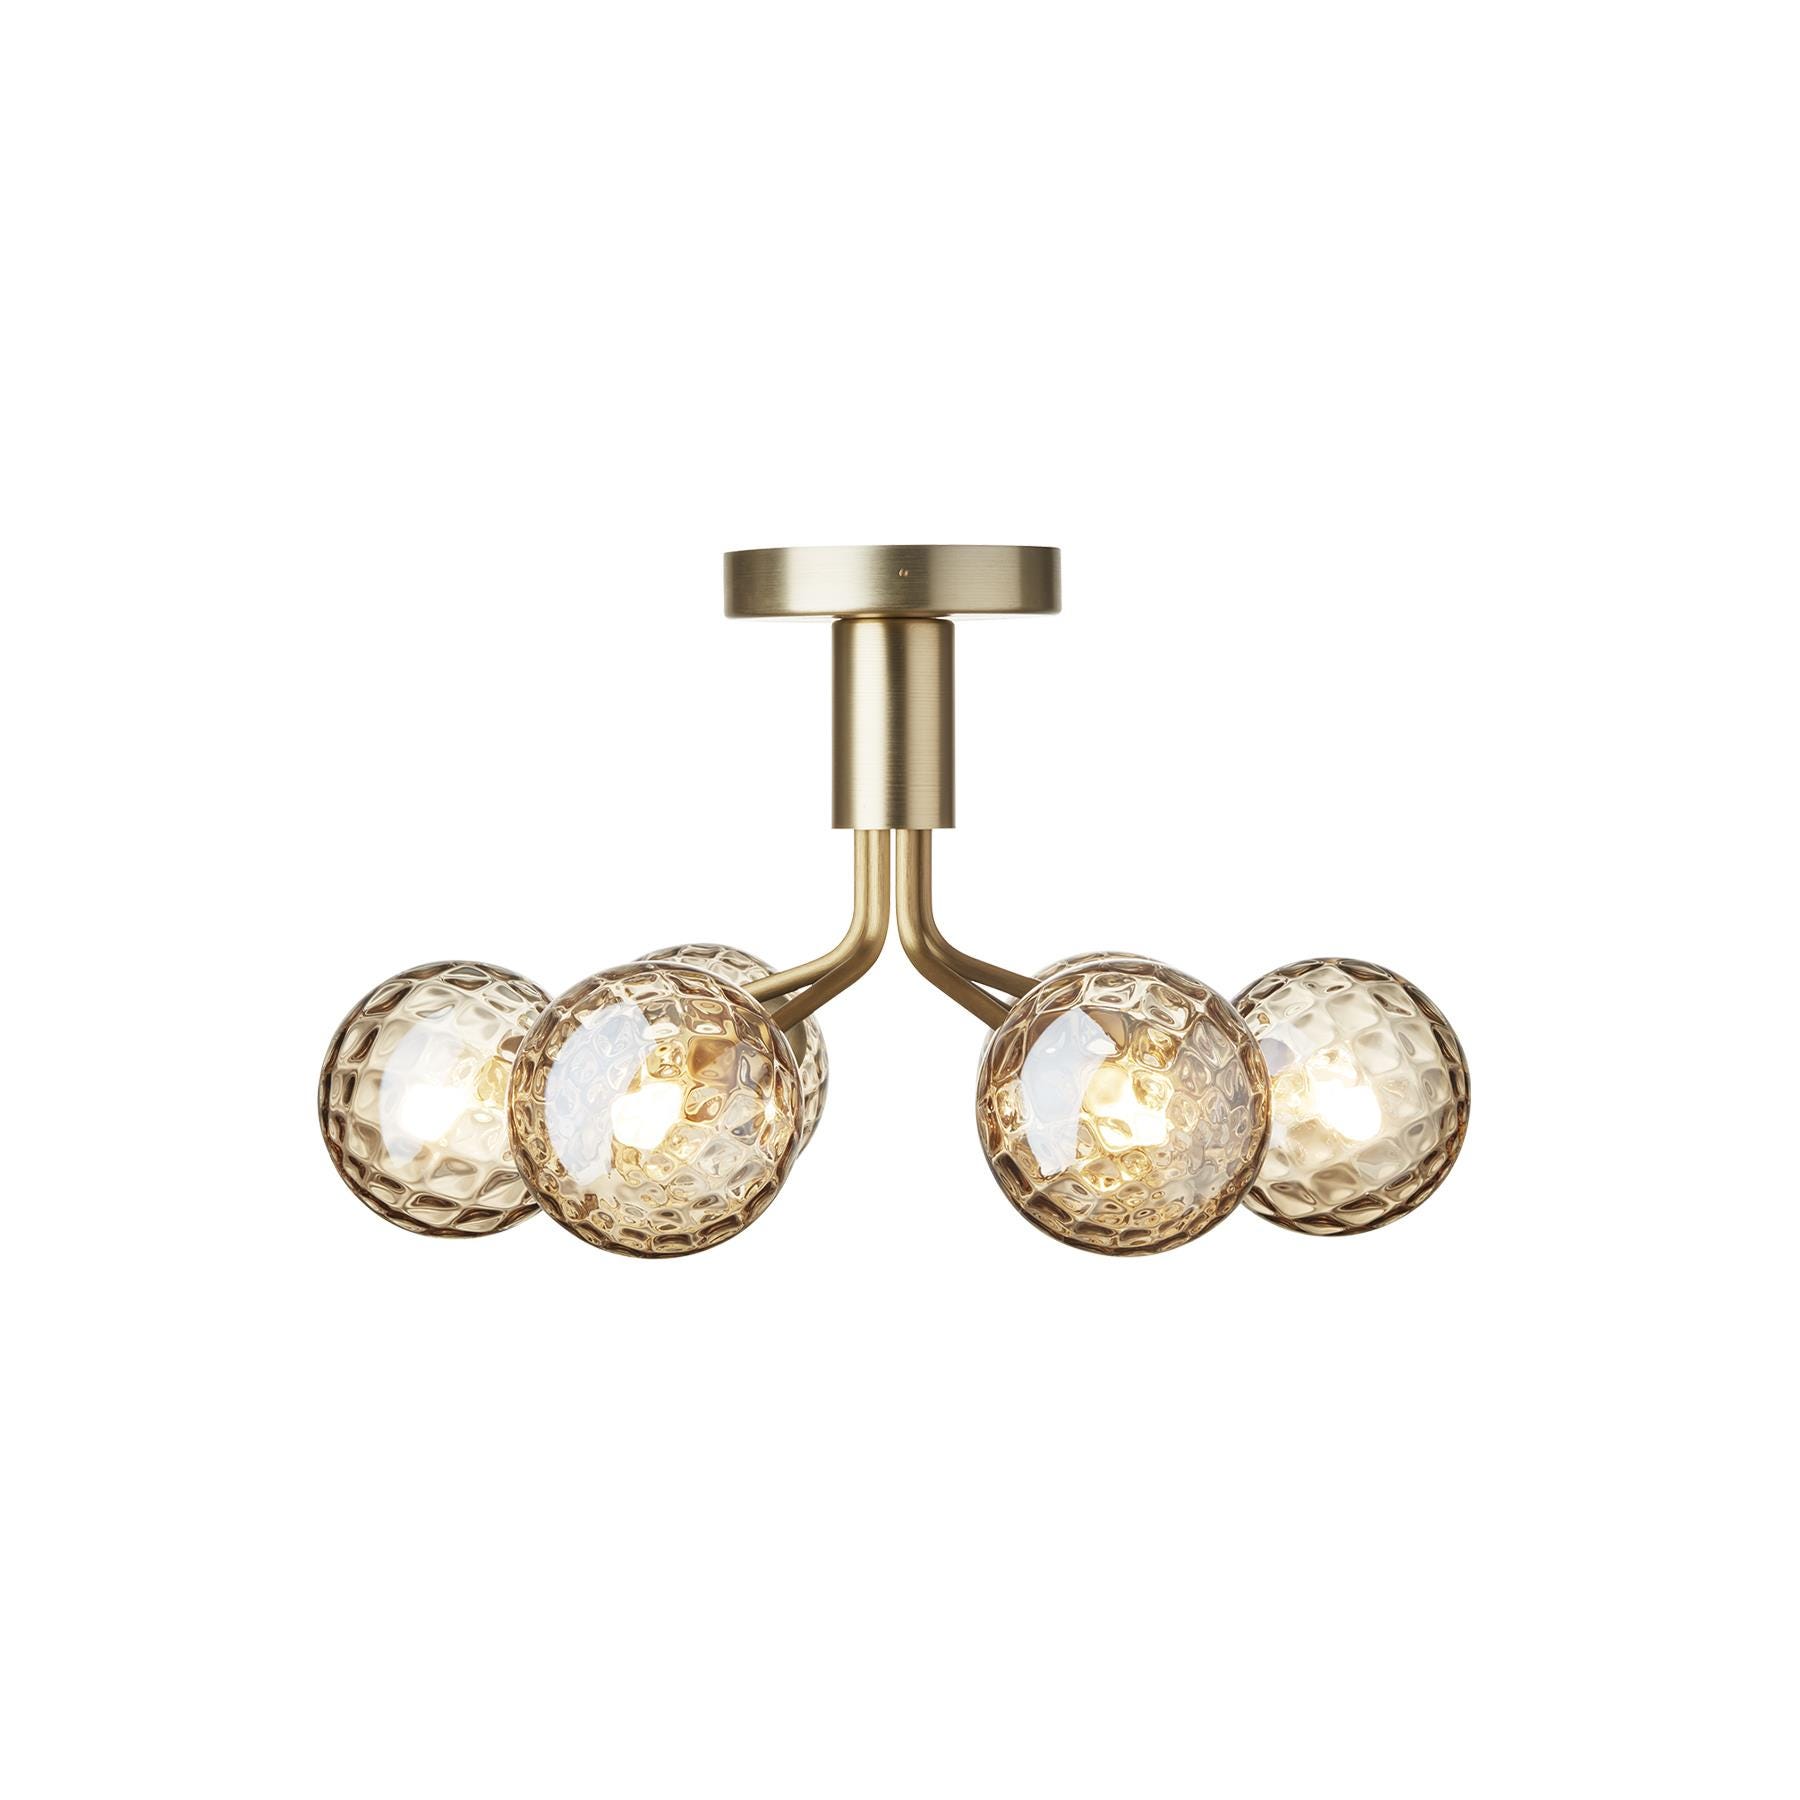 Nuura Apiales 6 Ceiling Light Brushed Brass Optic Gold Brassgold